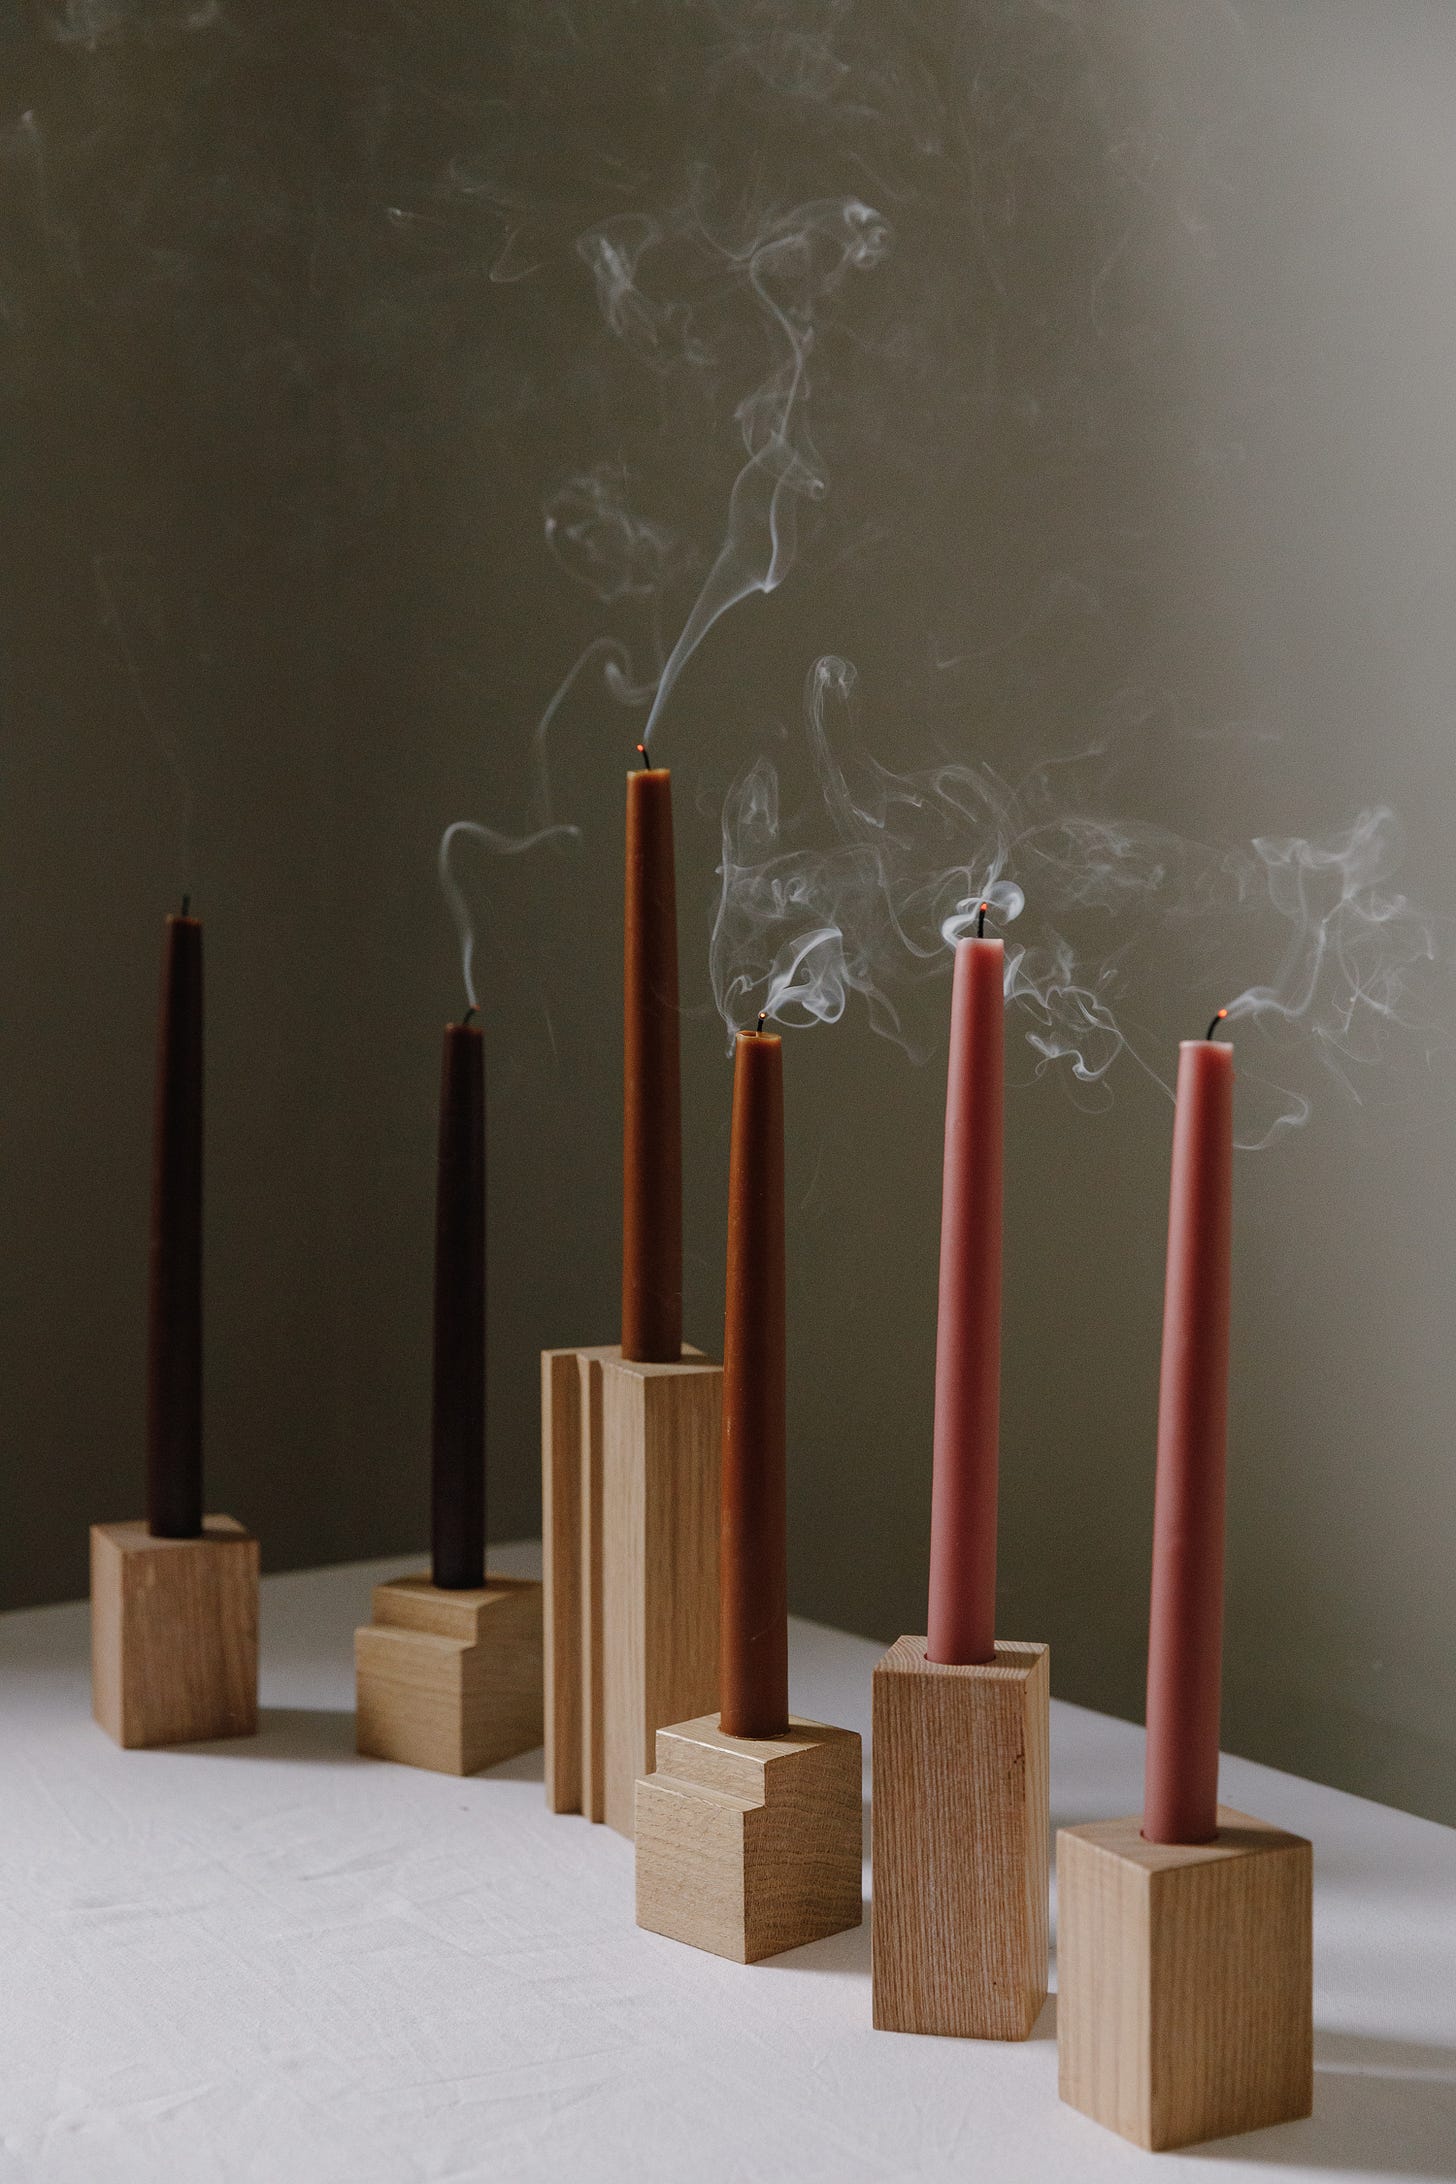 six dinner candles in a row on a tabletop that are smoking as they have just been blown out